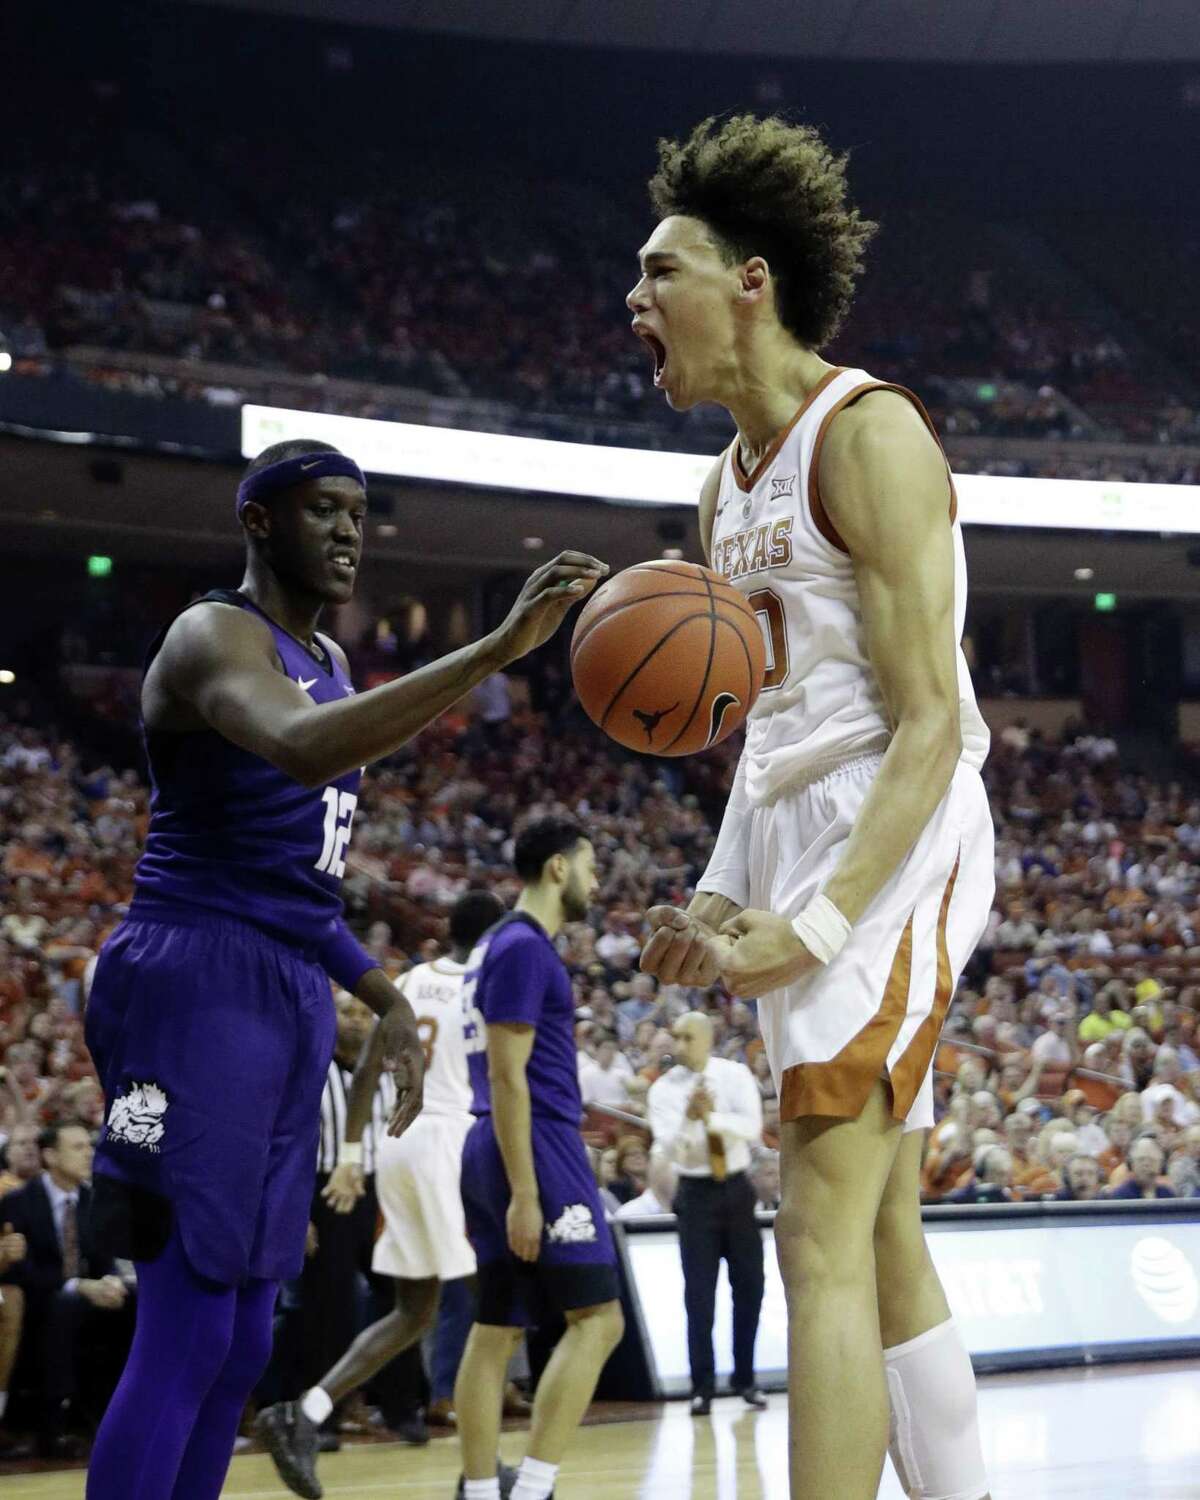 Texas forward Jaxson Hayes, right, reacts after scoring against TCU during the second half of an NCAA college basketball game, Saturday, March 9, 2019, in Austin, Texas. (AP Photo/Eric Gay)